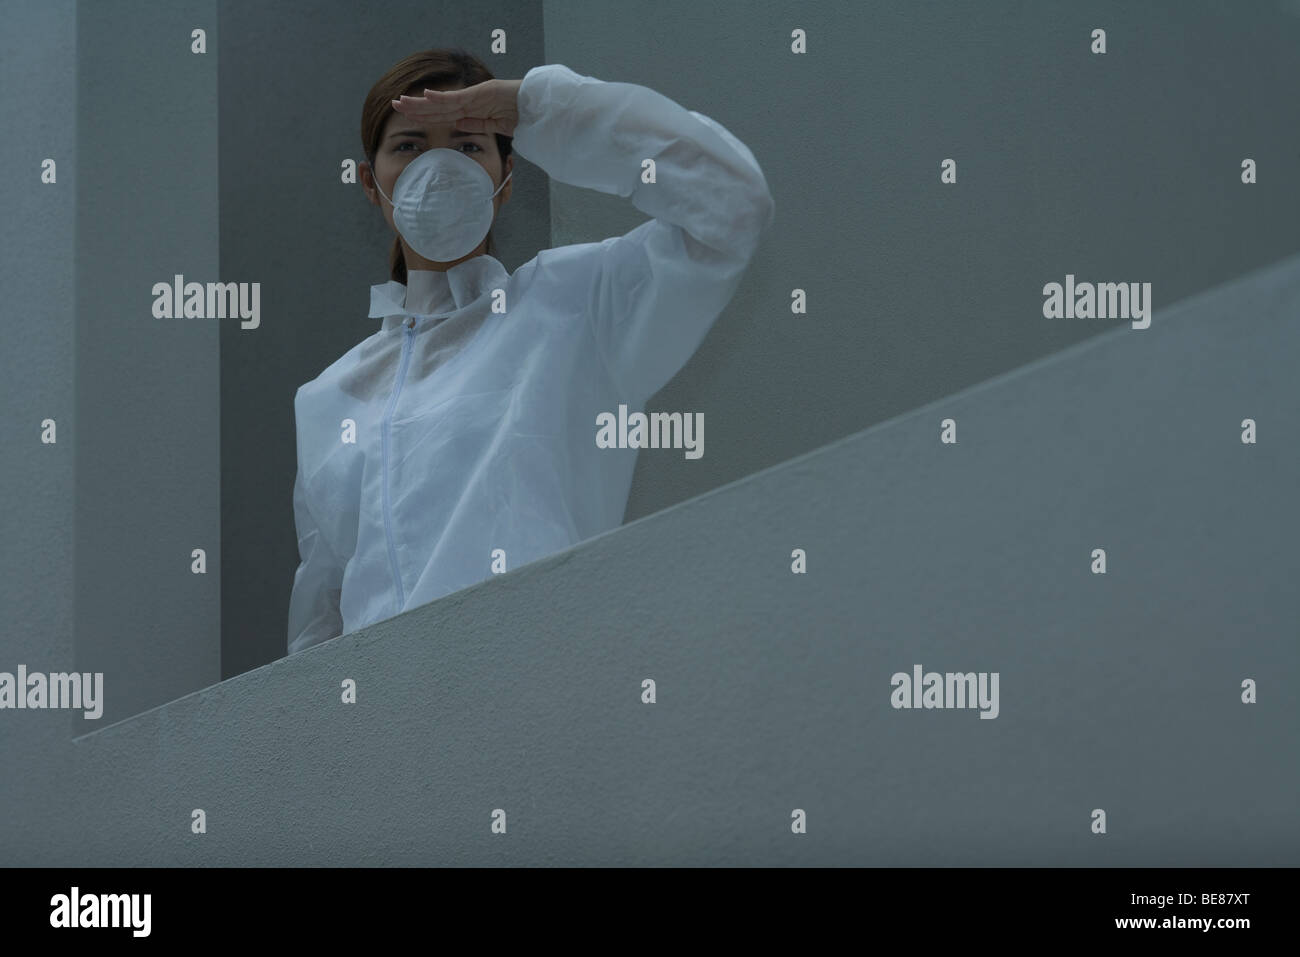 Woman in pollution mask and protective suit looking away, shading eyes Stock Photo